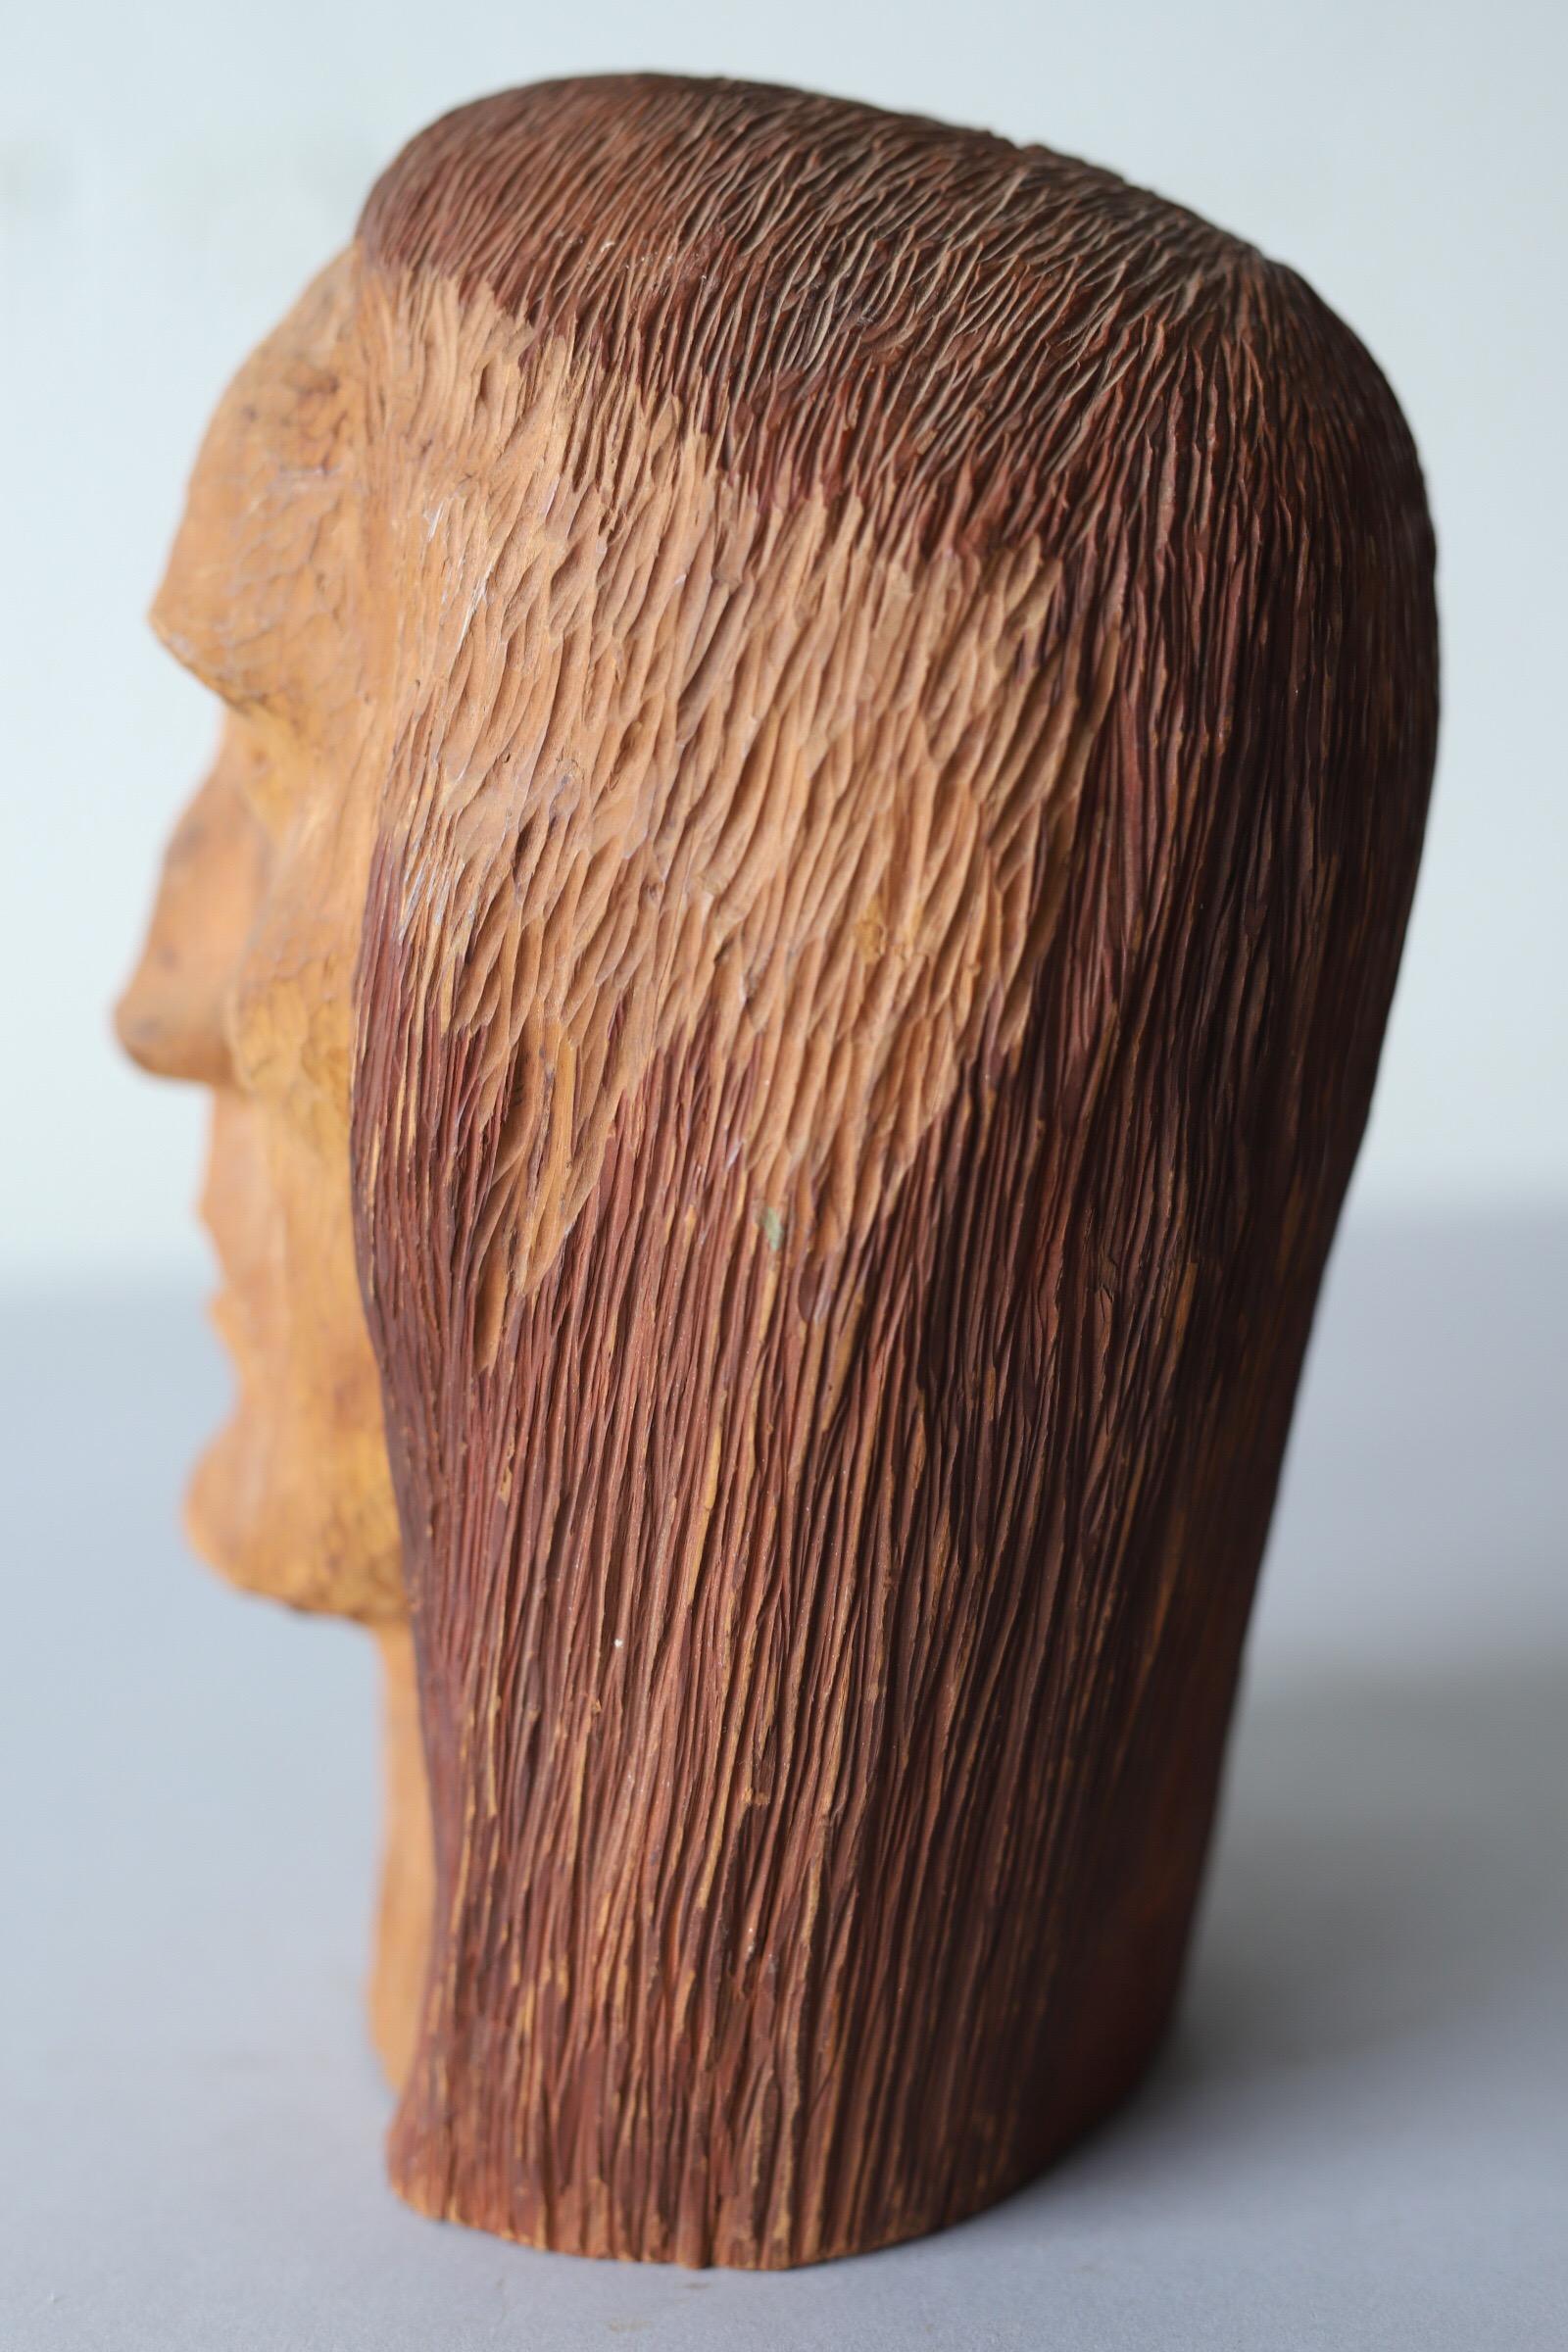 carved wooden head